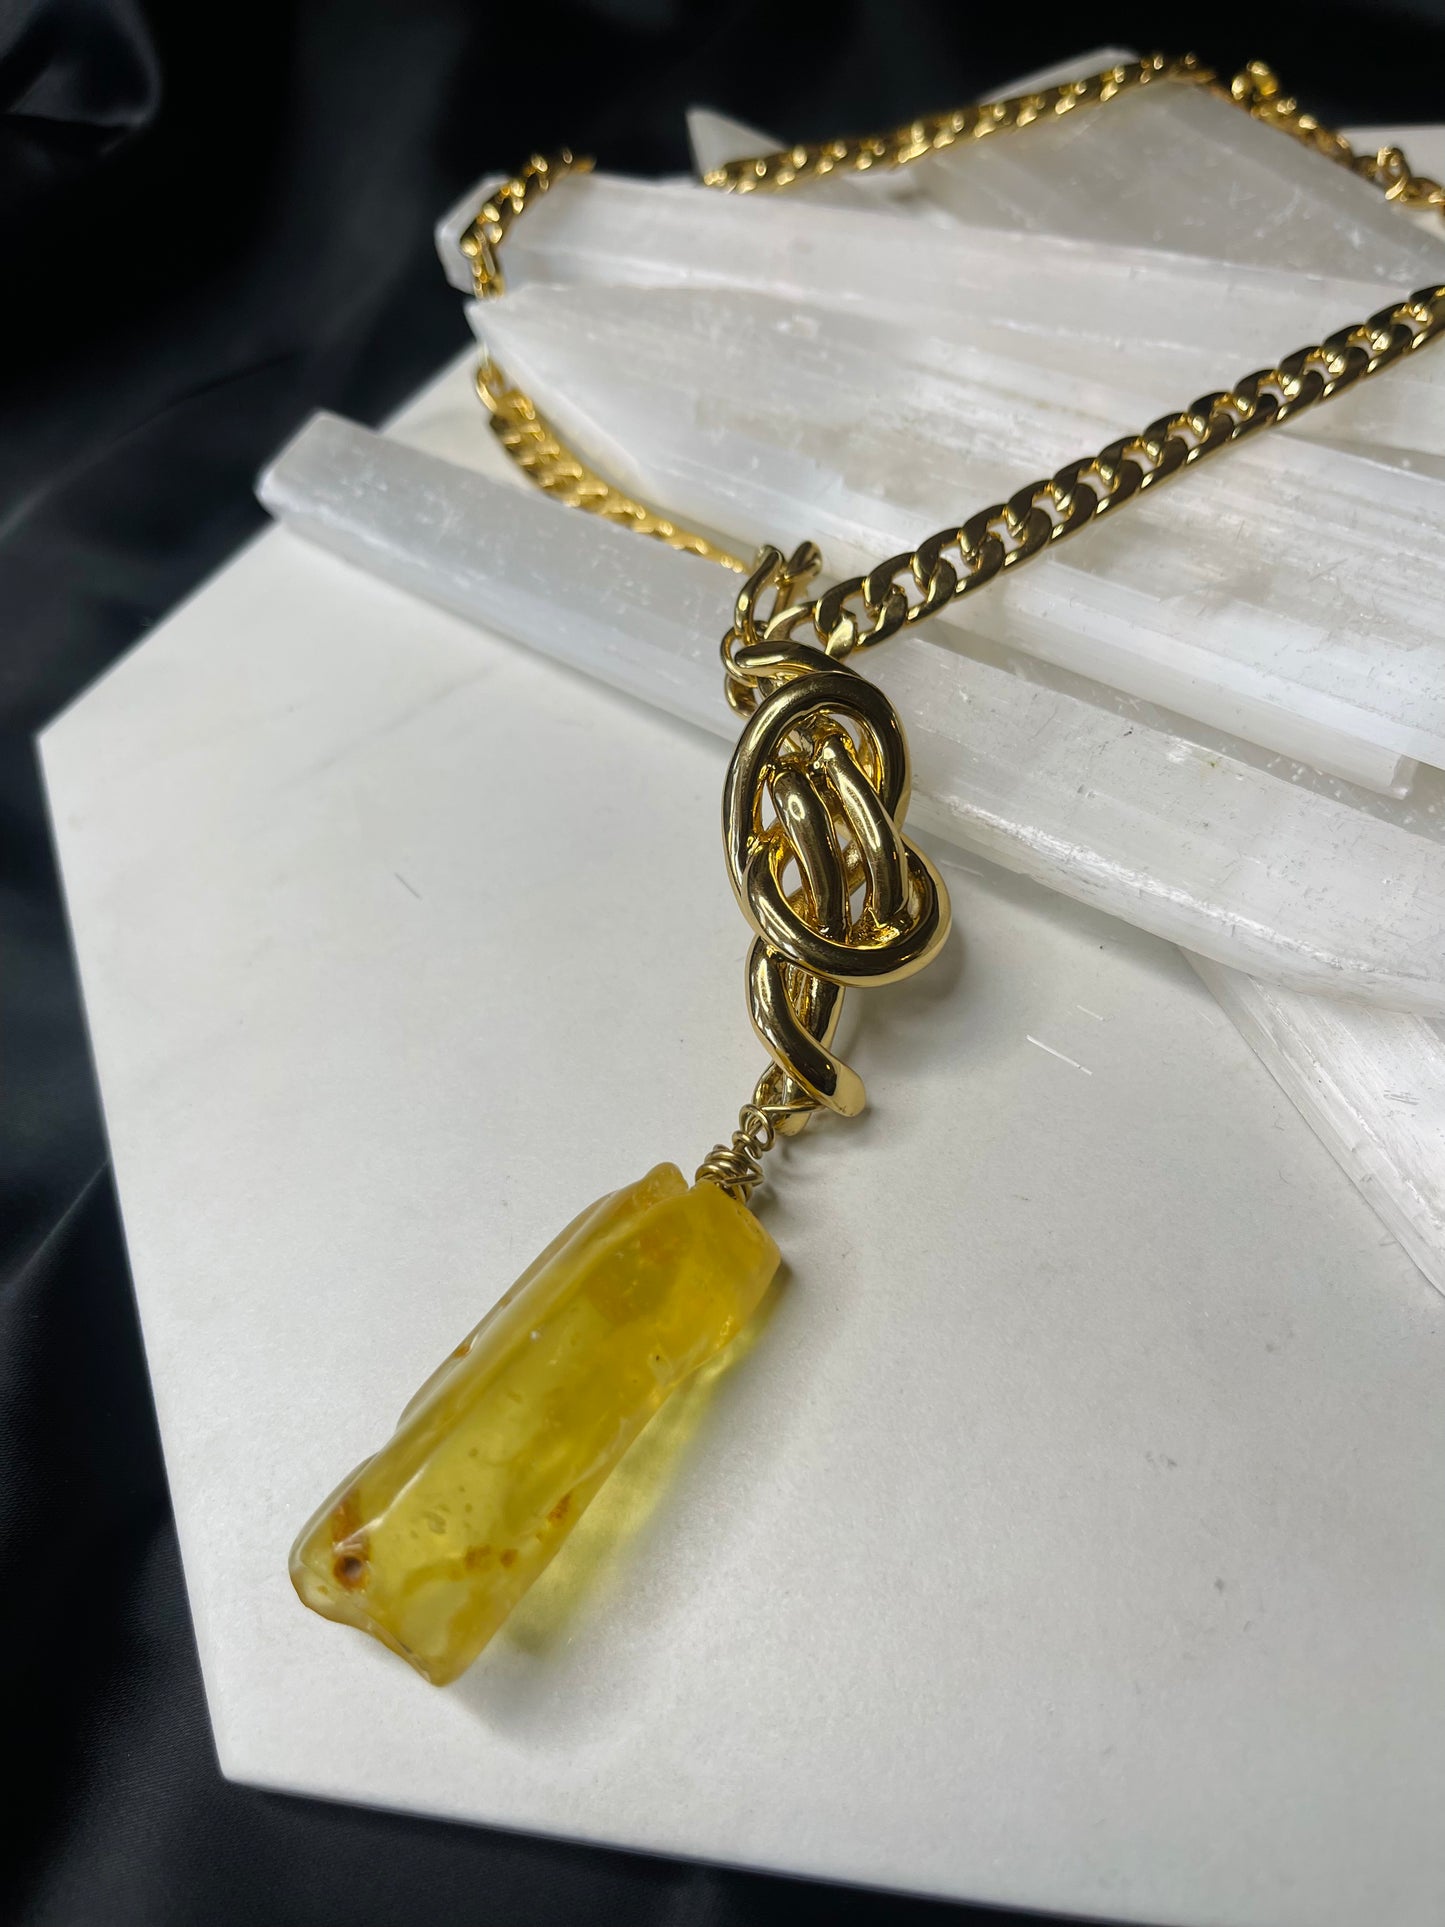 Ancient Amber Abundance Activation. Soul Chain Necklace Hand wrapped on vintage chain